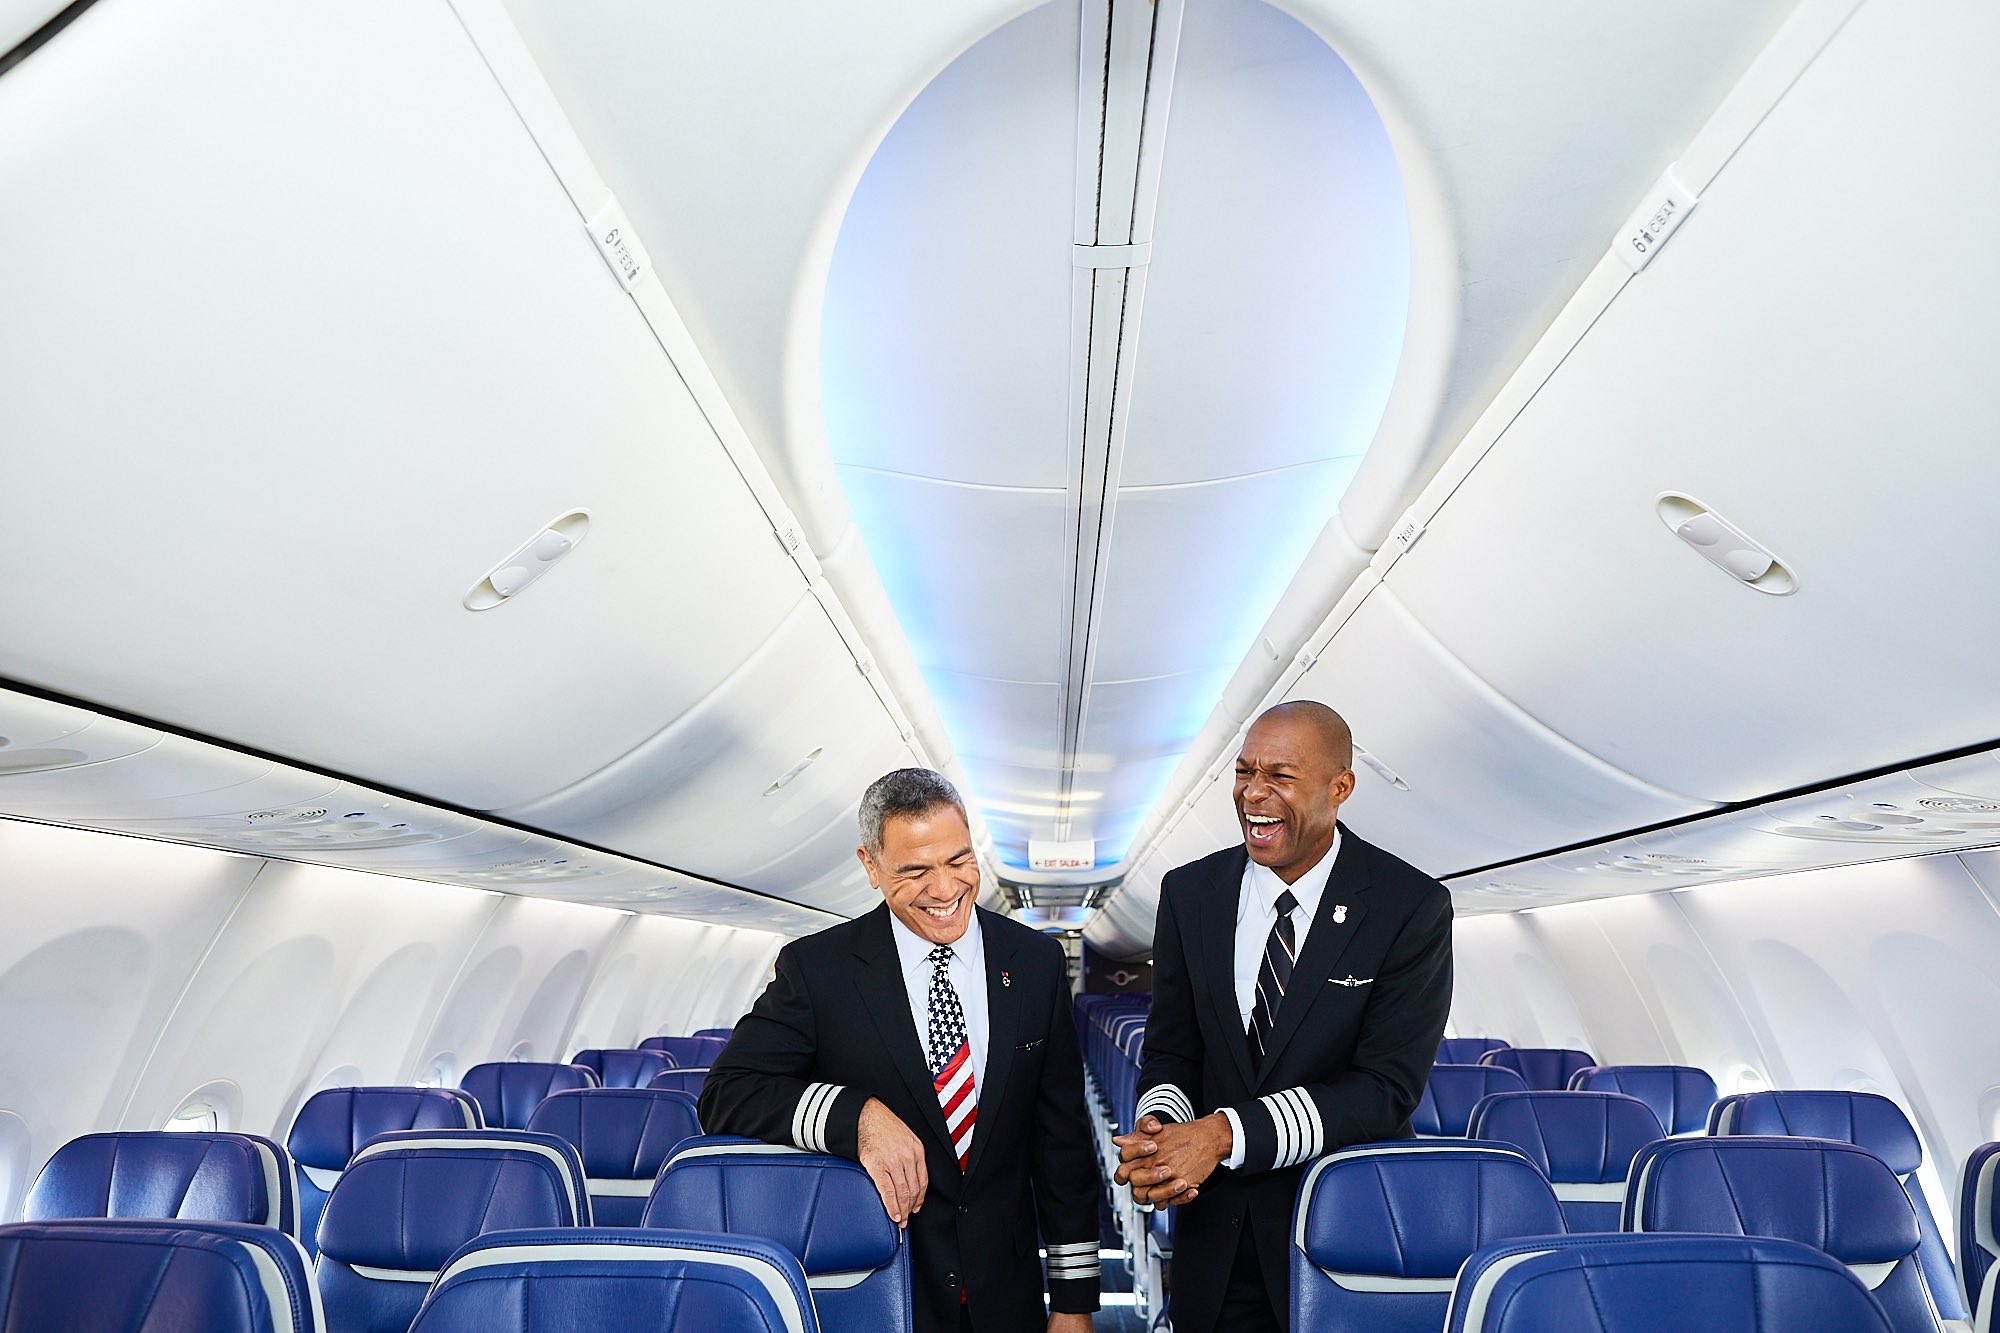 men in black suits standing in an airplane